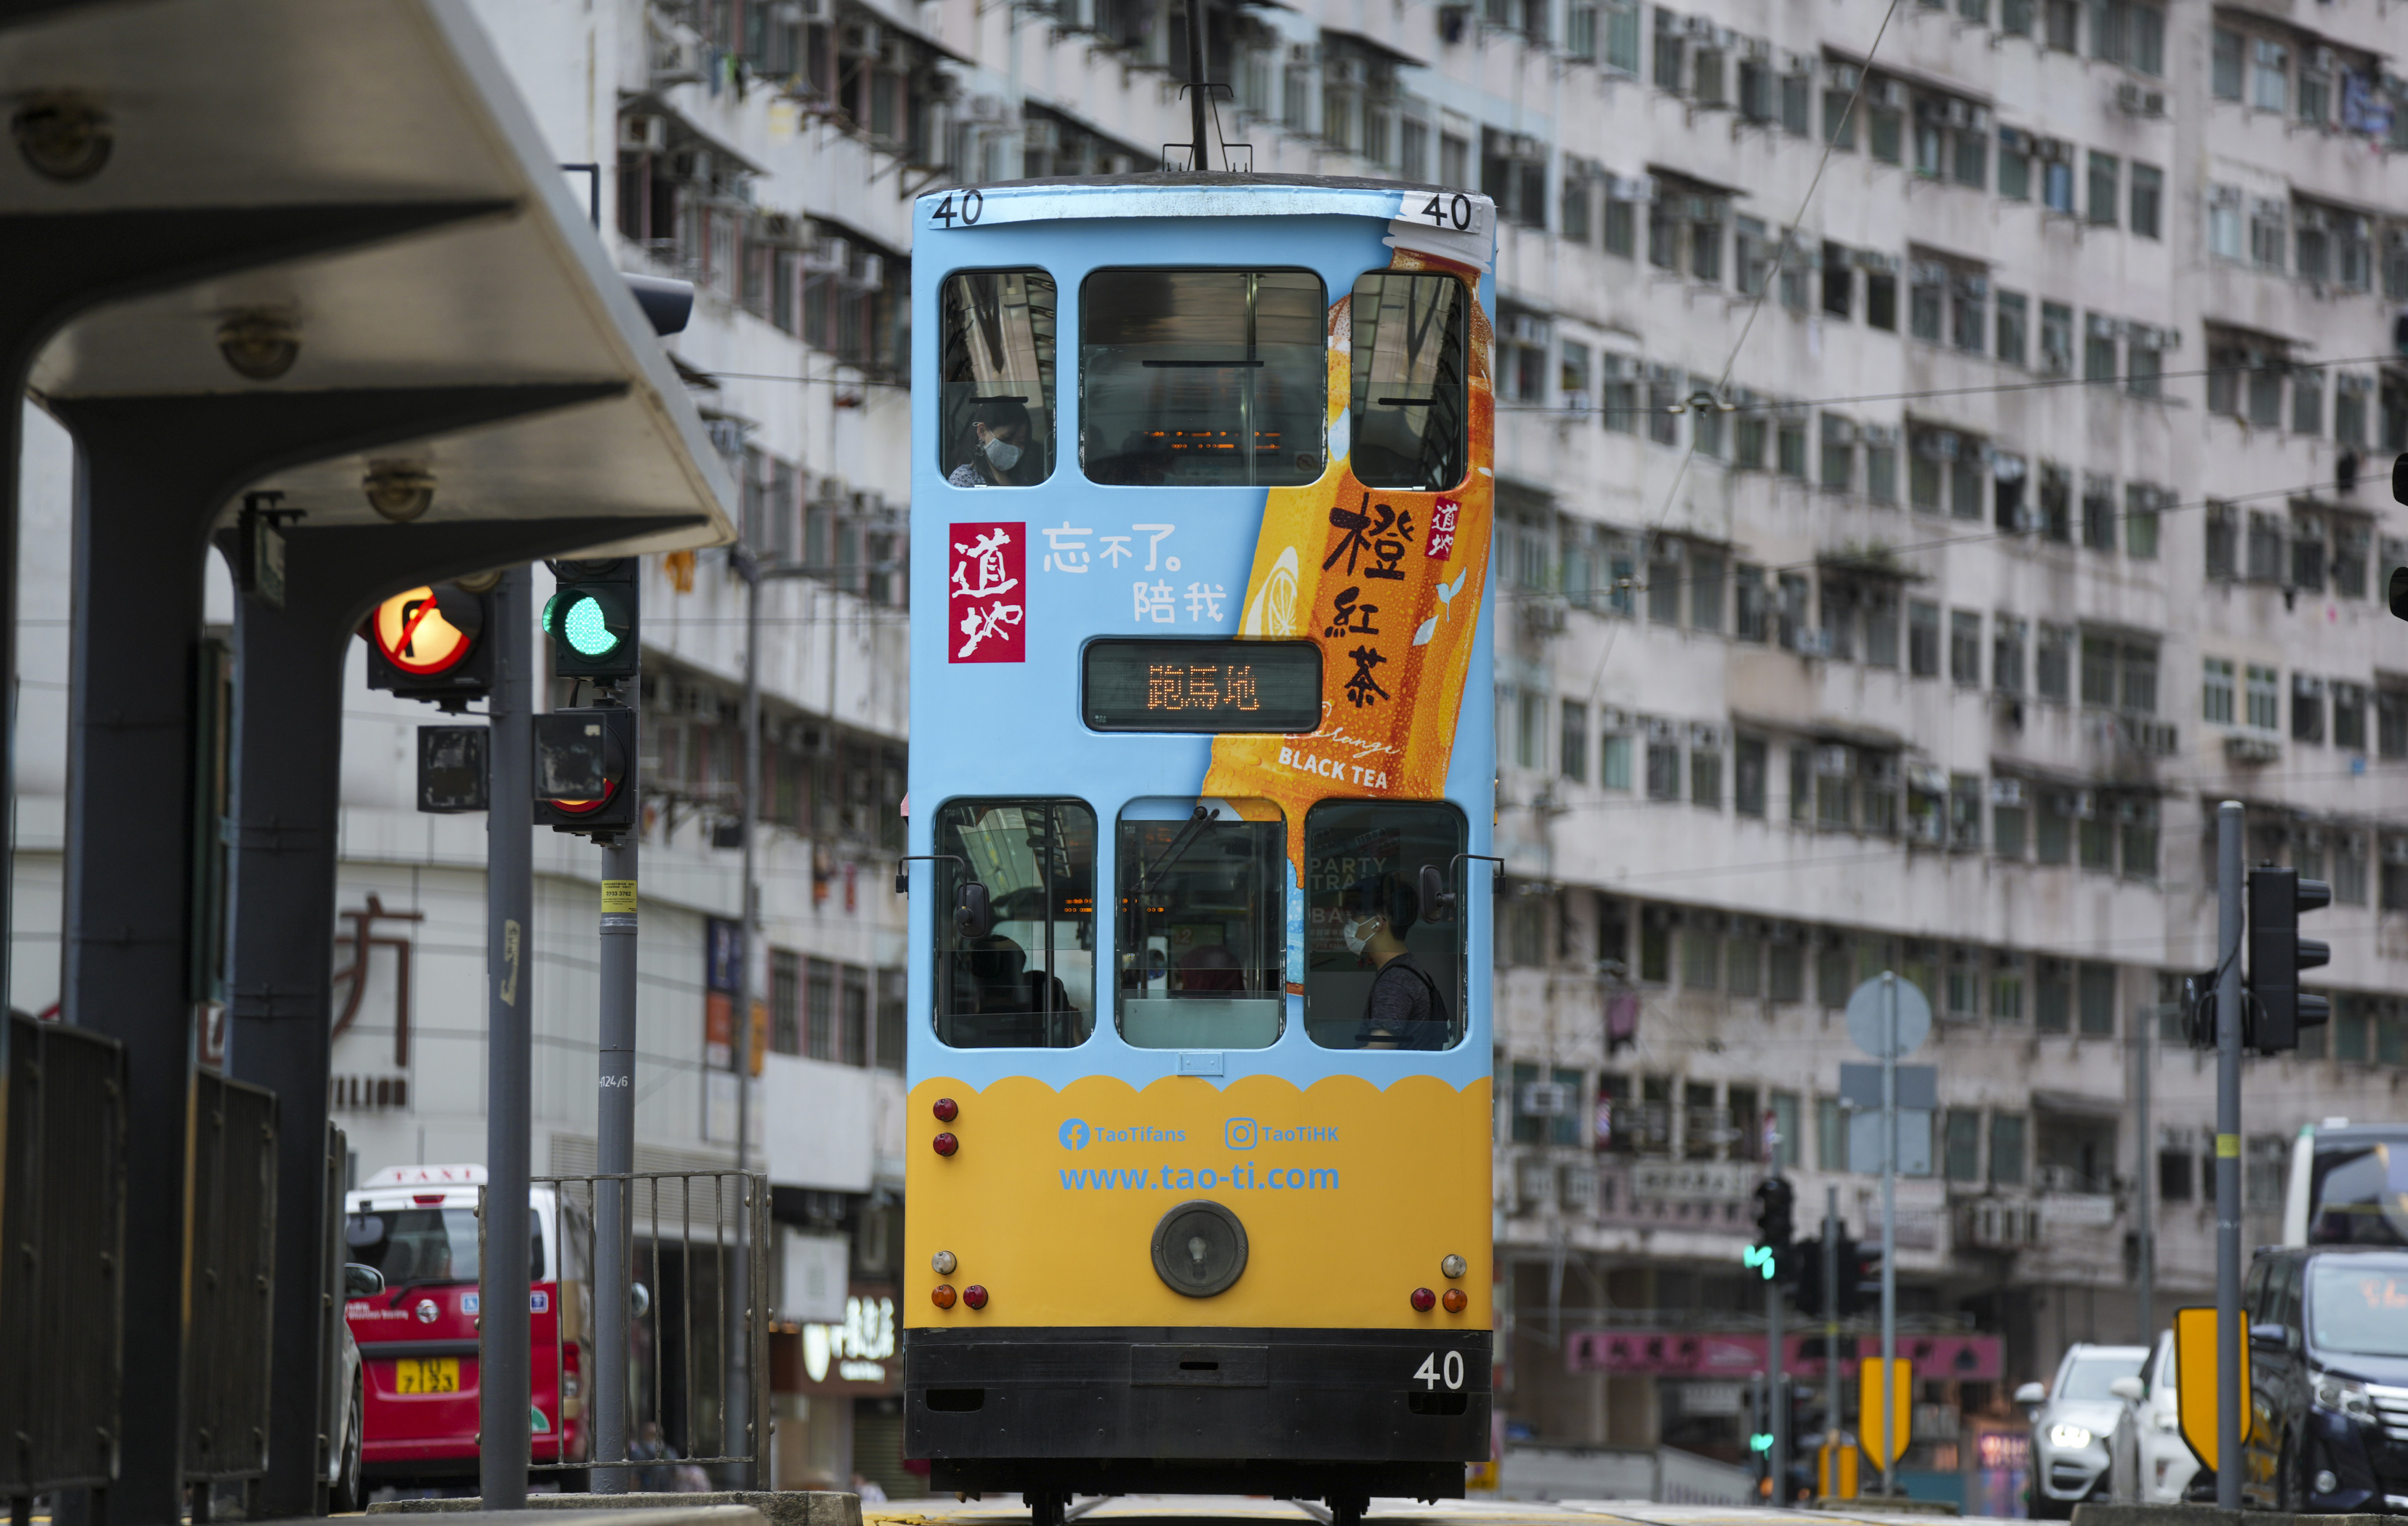 Hong Kong trams will be free on July 1, just one of many special offers to mark the July 1 handover anniversary. Photo: Sam Tsang